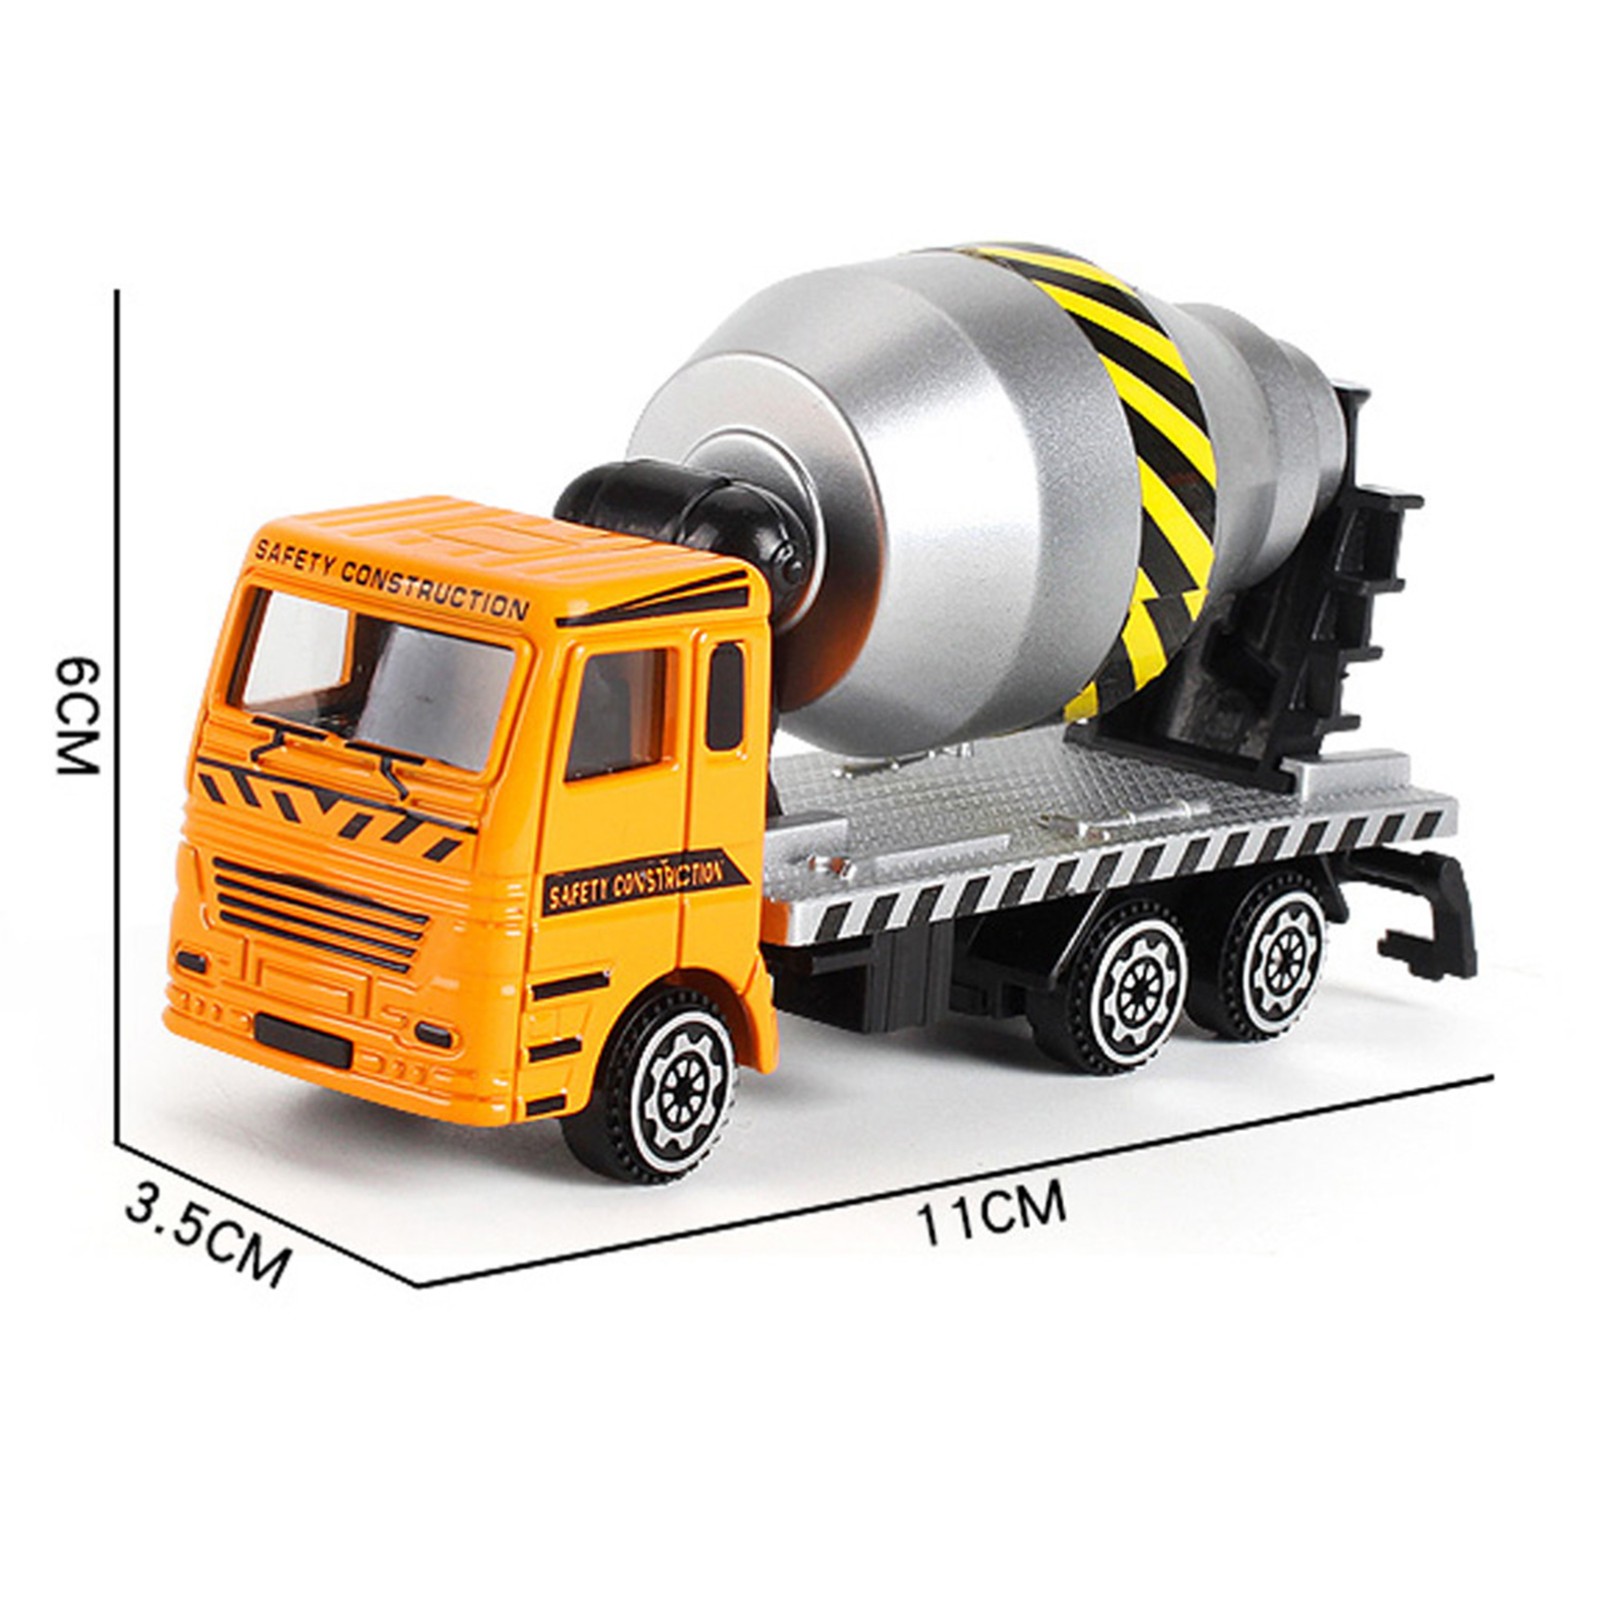 Tarmeek Construction Truck Toys with Crane for 2 4 5 6 Years Old Boys, Kids Alloy Engineering Vehicle Sets, Tractor Trailer Excavator Dump Wheel Loader Cement Forklift, Car for Xmas Birthday Gifts - image 3 of 5